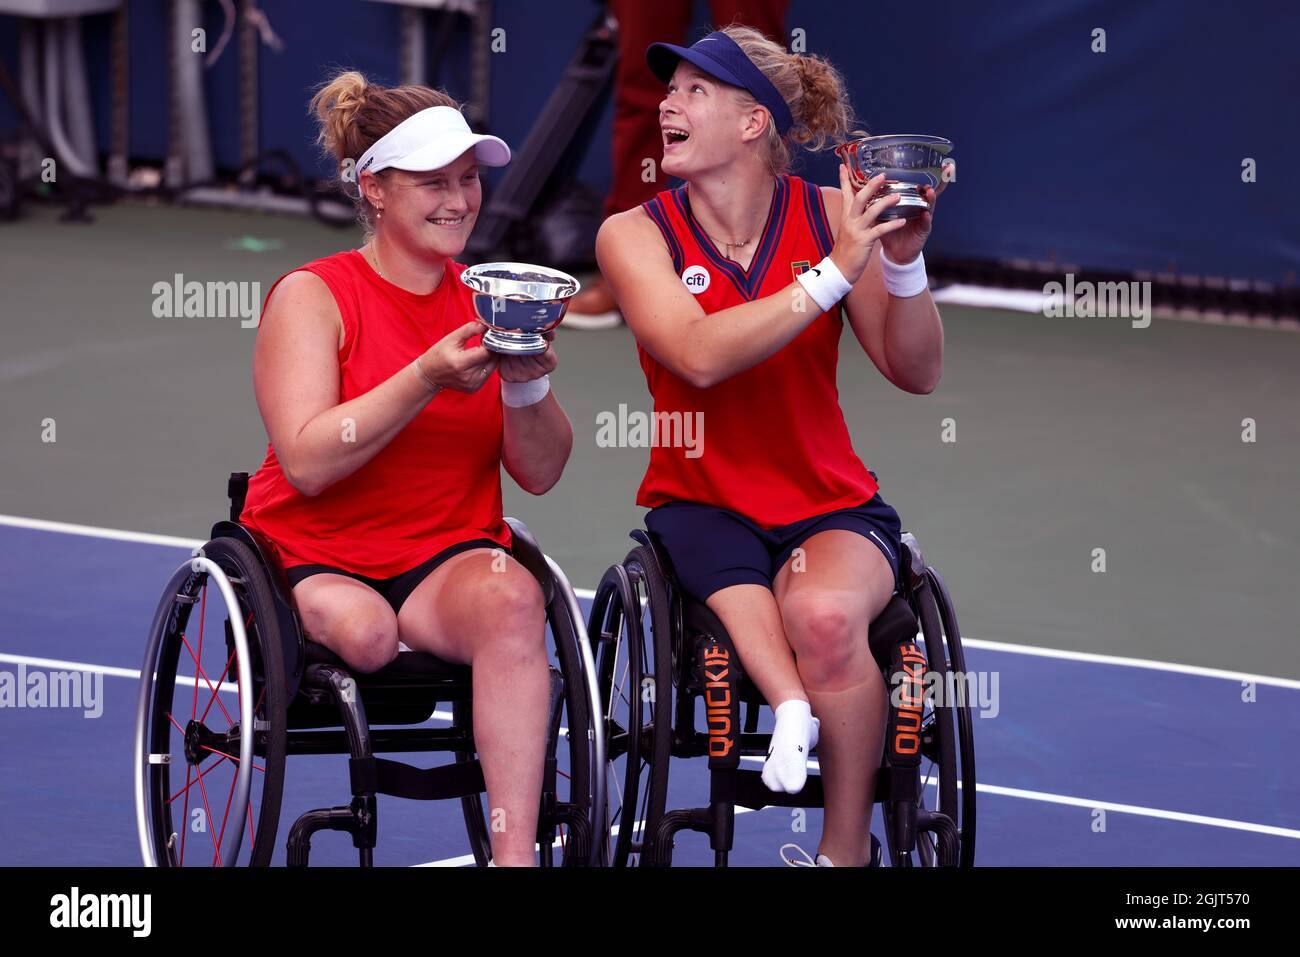 New York City, United States. 11th Sep, 2021. Flushing Meadows, New York -  September 11, 2021: New York: Diede de Groot, and Aniek van Koot of the  Netherlands with their trophies after